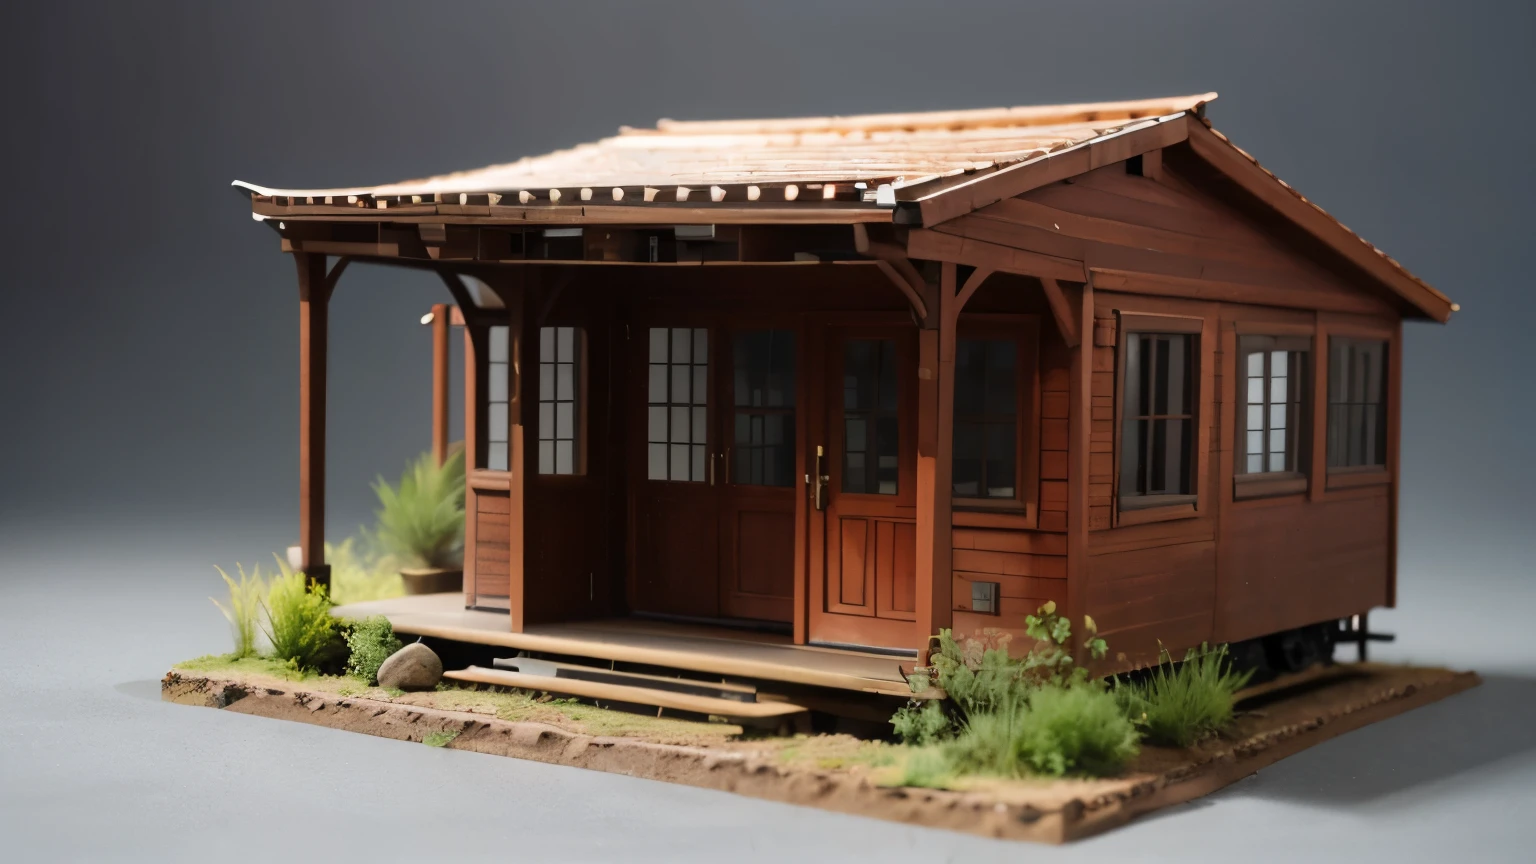 Diorama photo of a small station